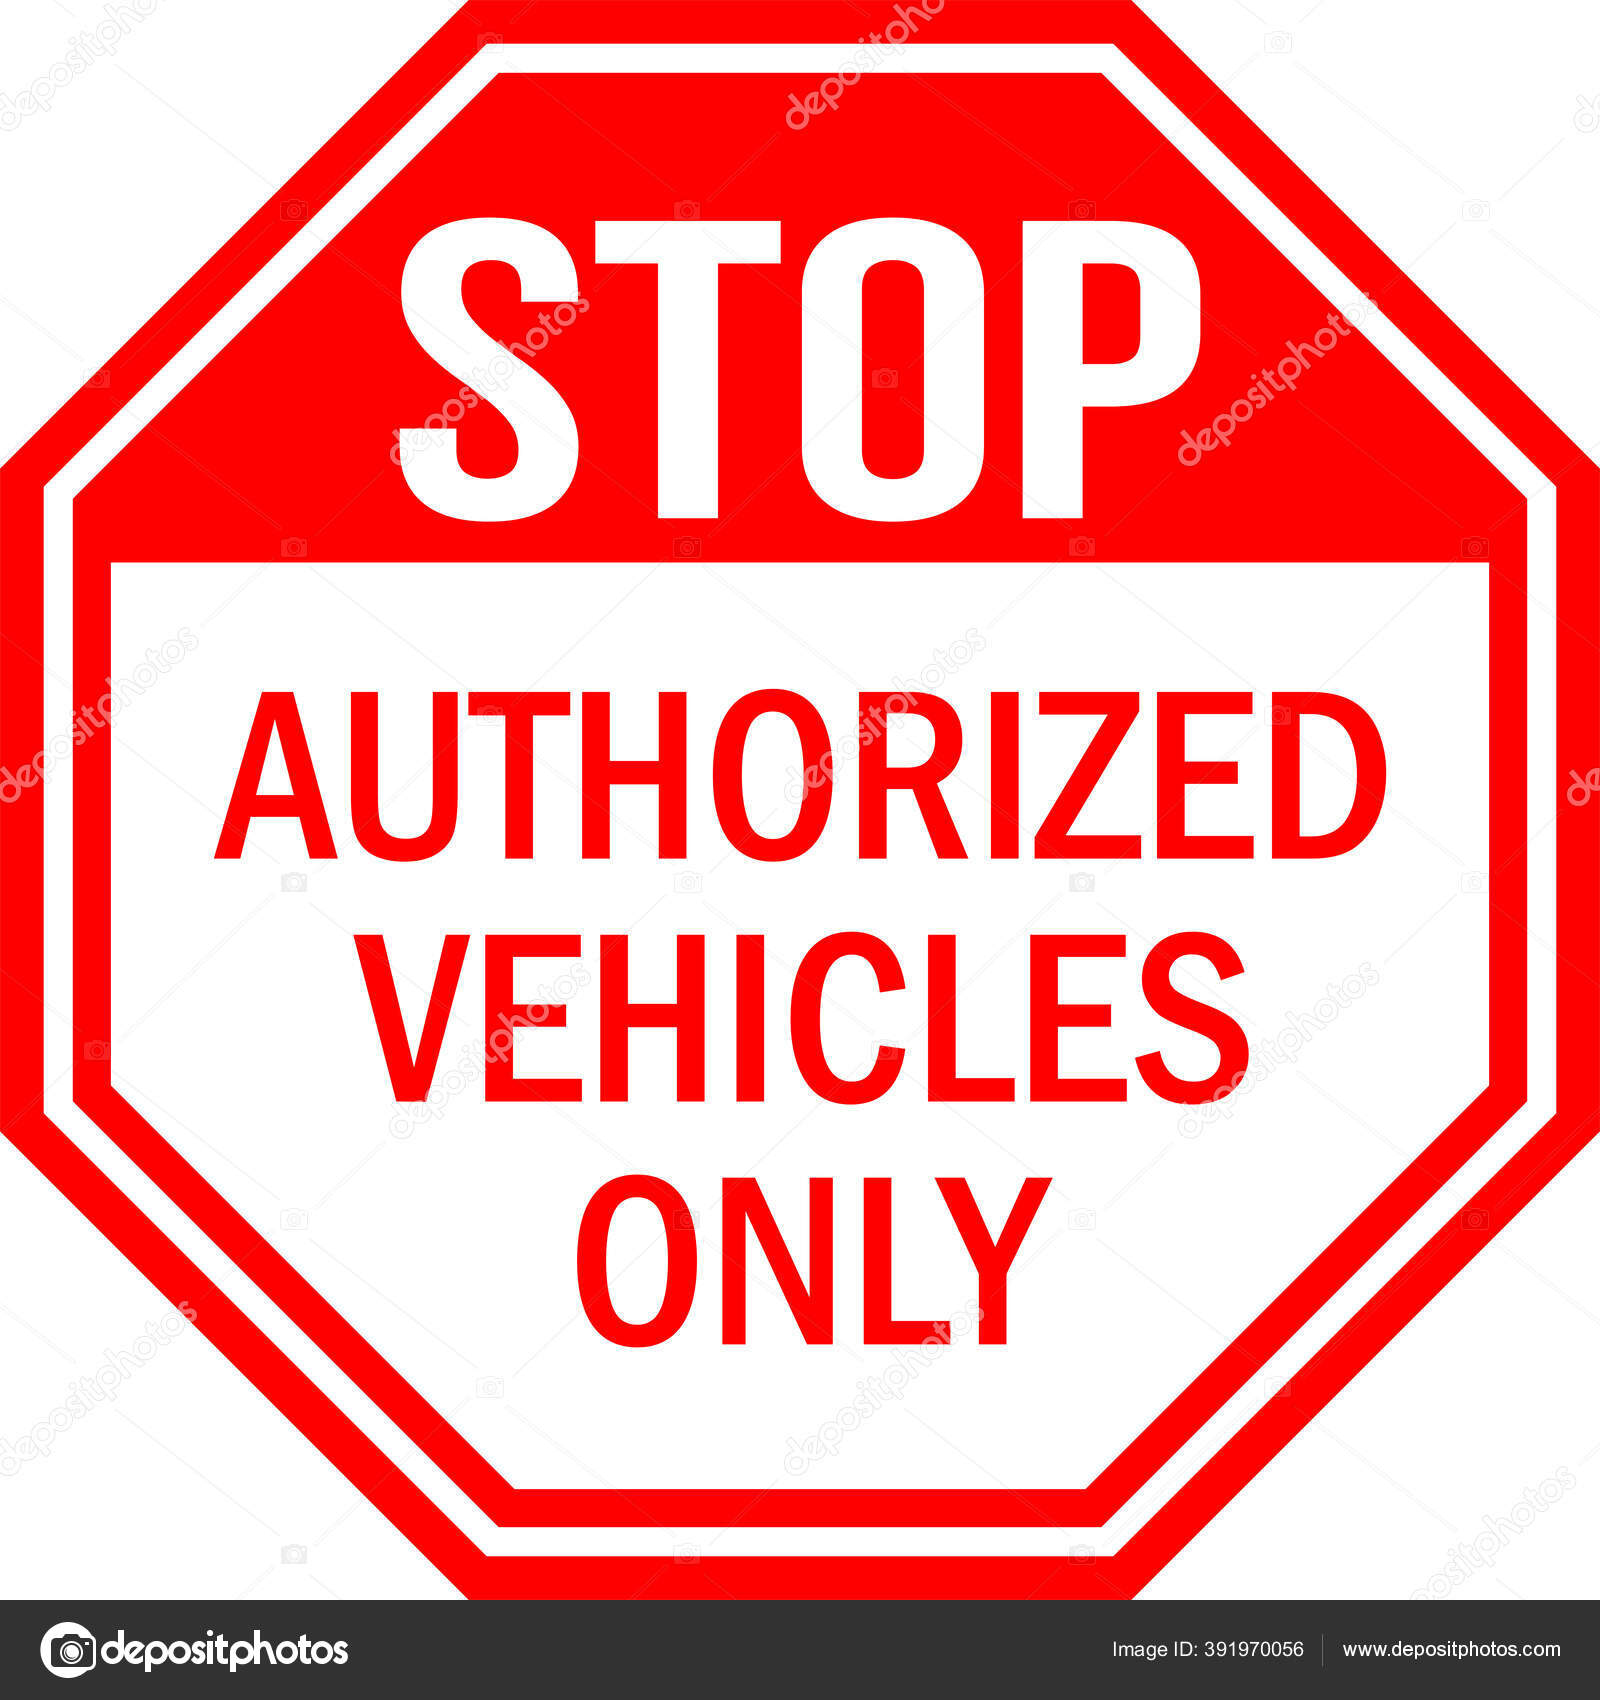 Authorised vehicles only safety sign